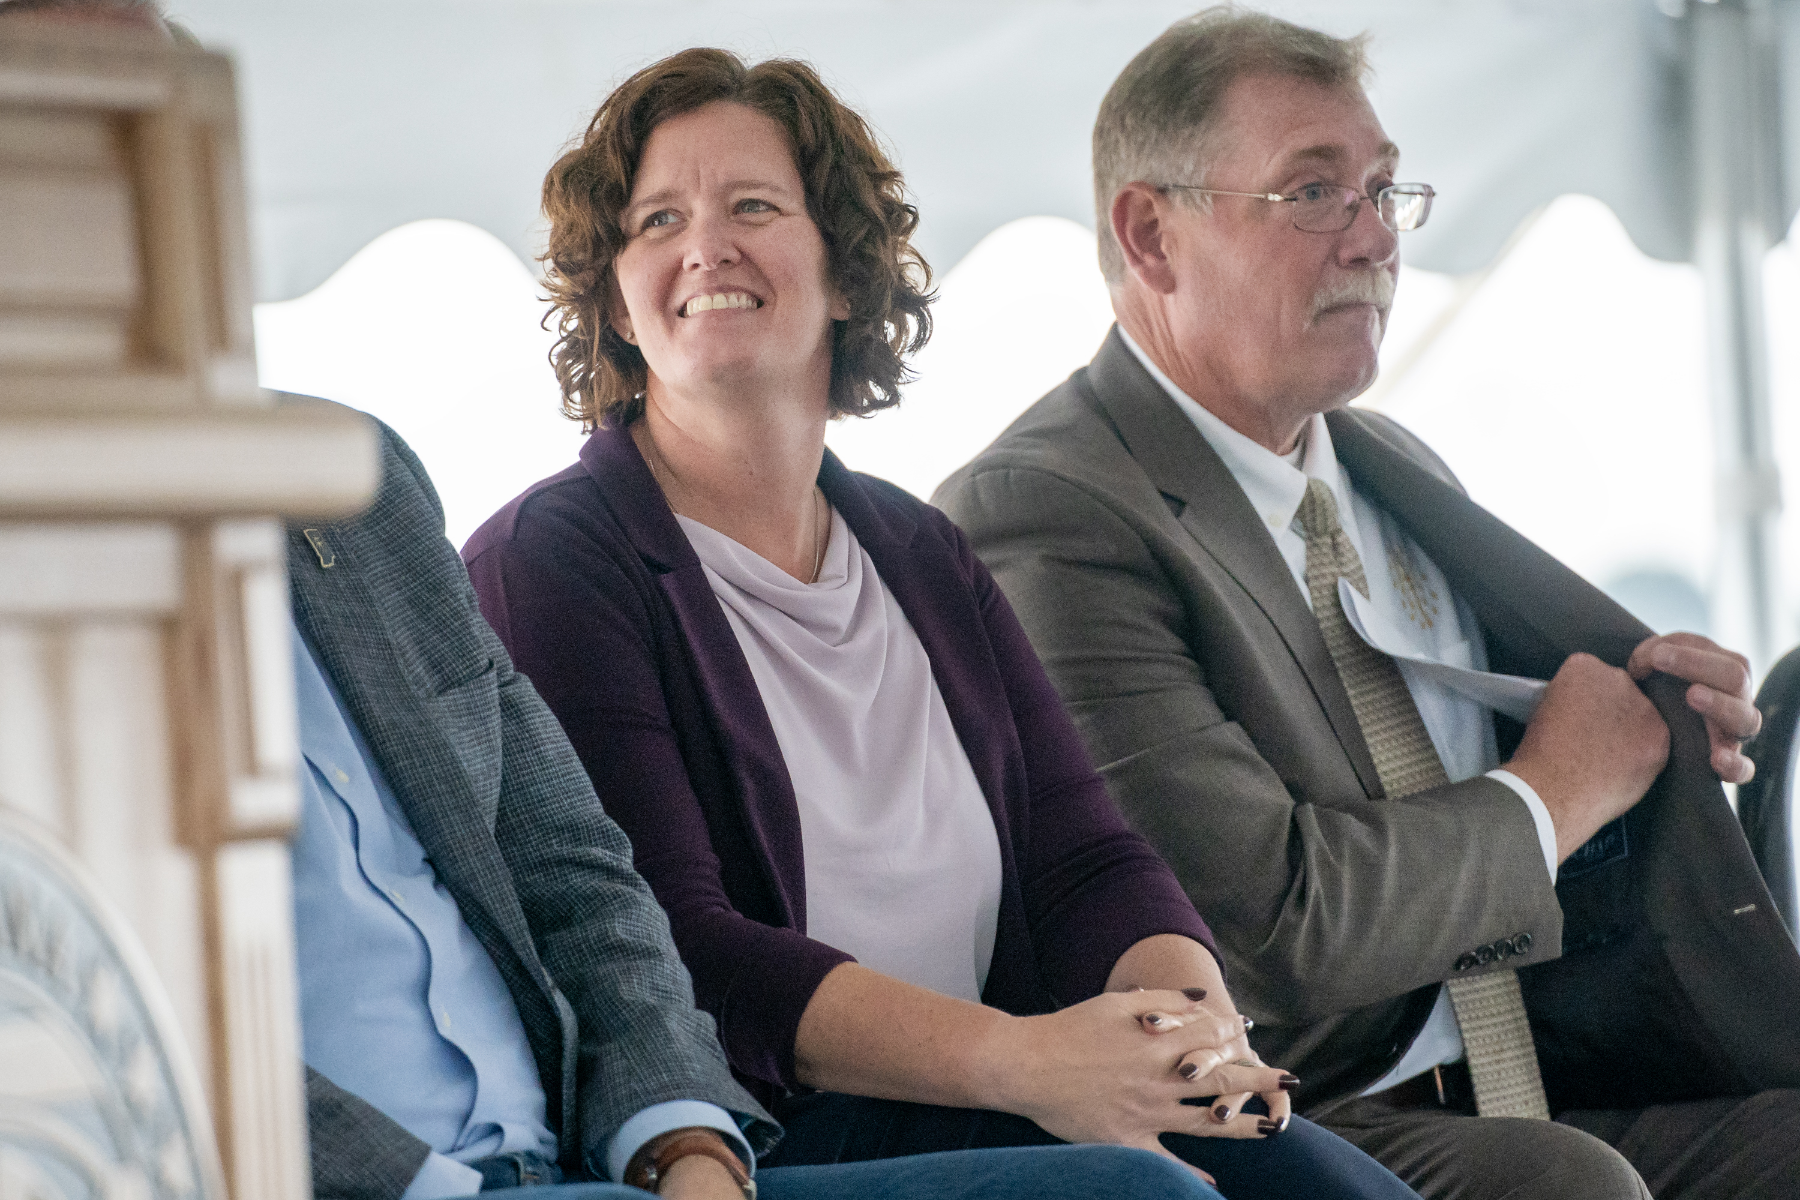 IDOC Commissioner Christina Reagle and Executive Director of Construction Services Kevin Orme listen to a speaker on Thursday, Sep. 28, 2023 during the groundbreaking for the new $1.2 Billion correctional facility under construction in Westville, Indiana. SCOTT ROBERSON | Indiana Department of Correction